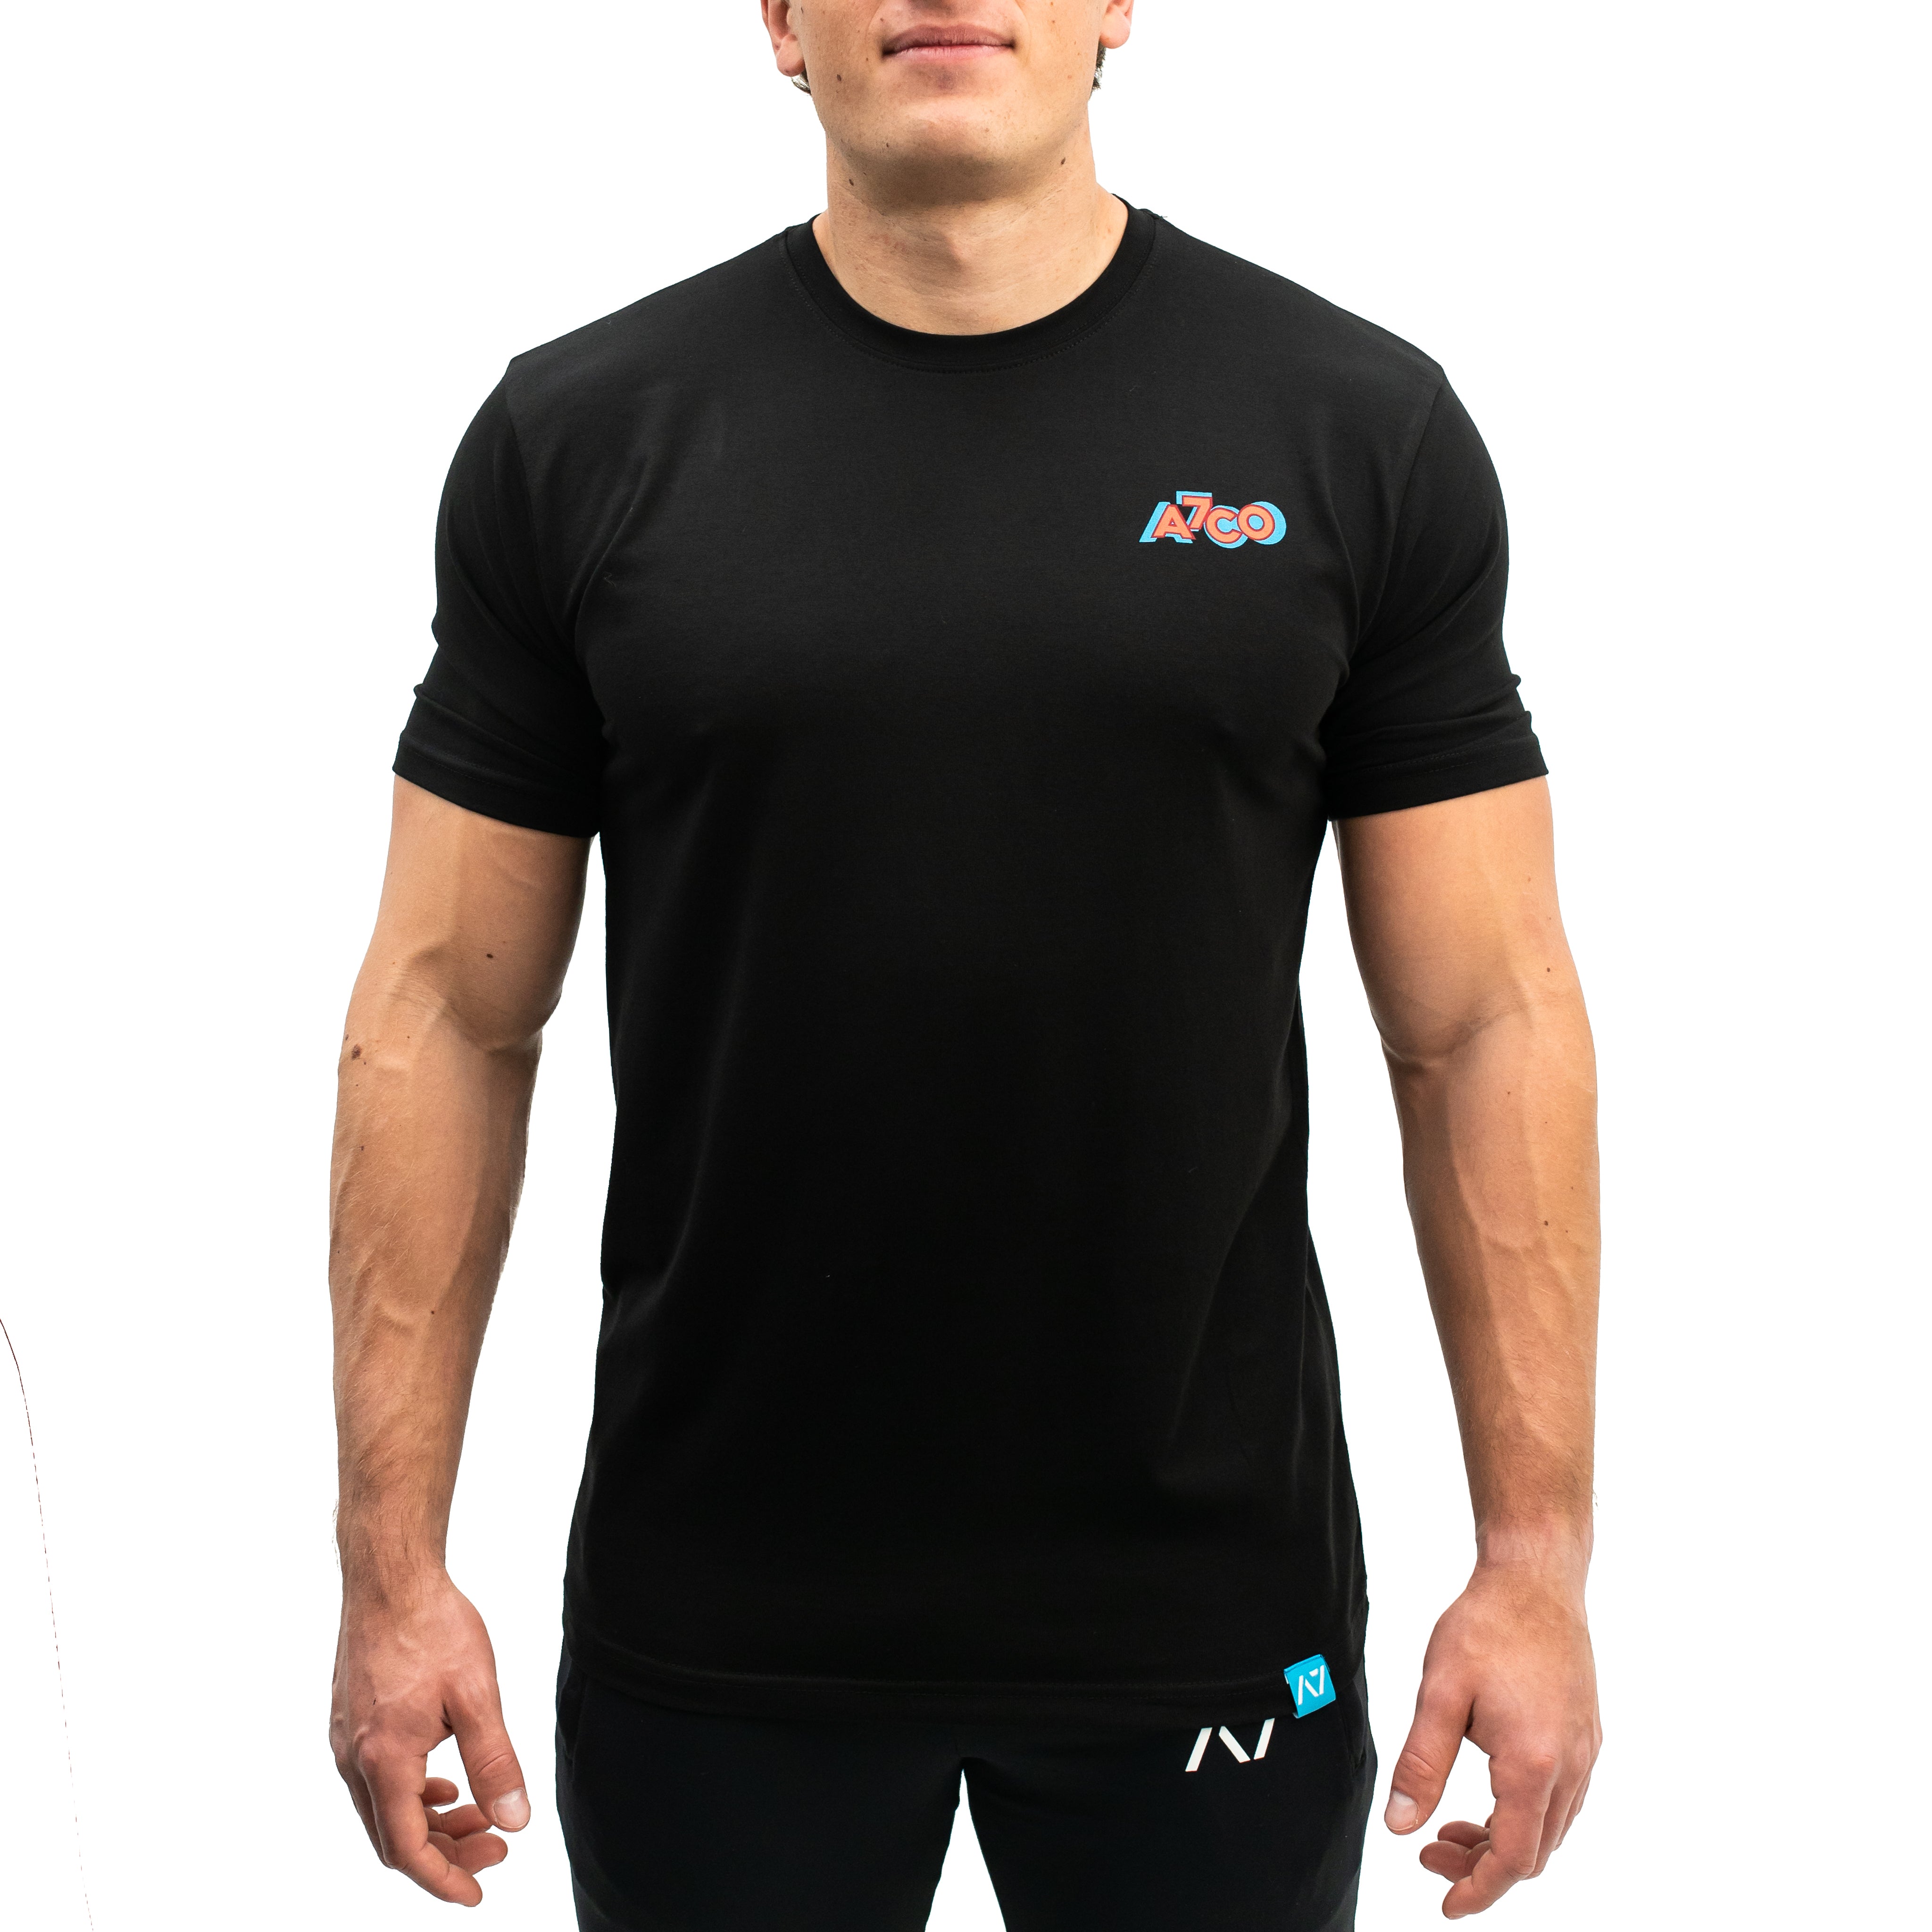 LSTS Strongman Non Bar Grip Shirt combines the dark with the fun and colourful designs to bring that pop of colour into the daily workouts. LSTS Strongman Non Bar Grip Shirt is great for strongman. Purchase LSTS Strongman Non Bar Grip Shirt from A7 UK and A7 Europe. LSTS Strongman Non Bar Grip Shirt is great for both in and out the gym. A7UK has the best strongman apparel for all your workouts. Available in UK and Europe including France, Italy, Germany, the Netherlands, Sweden and Poland.